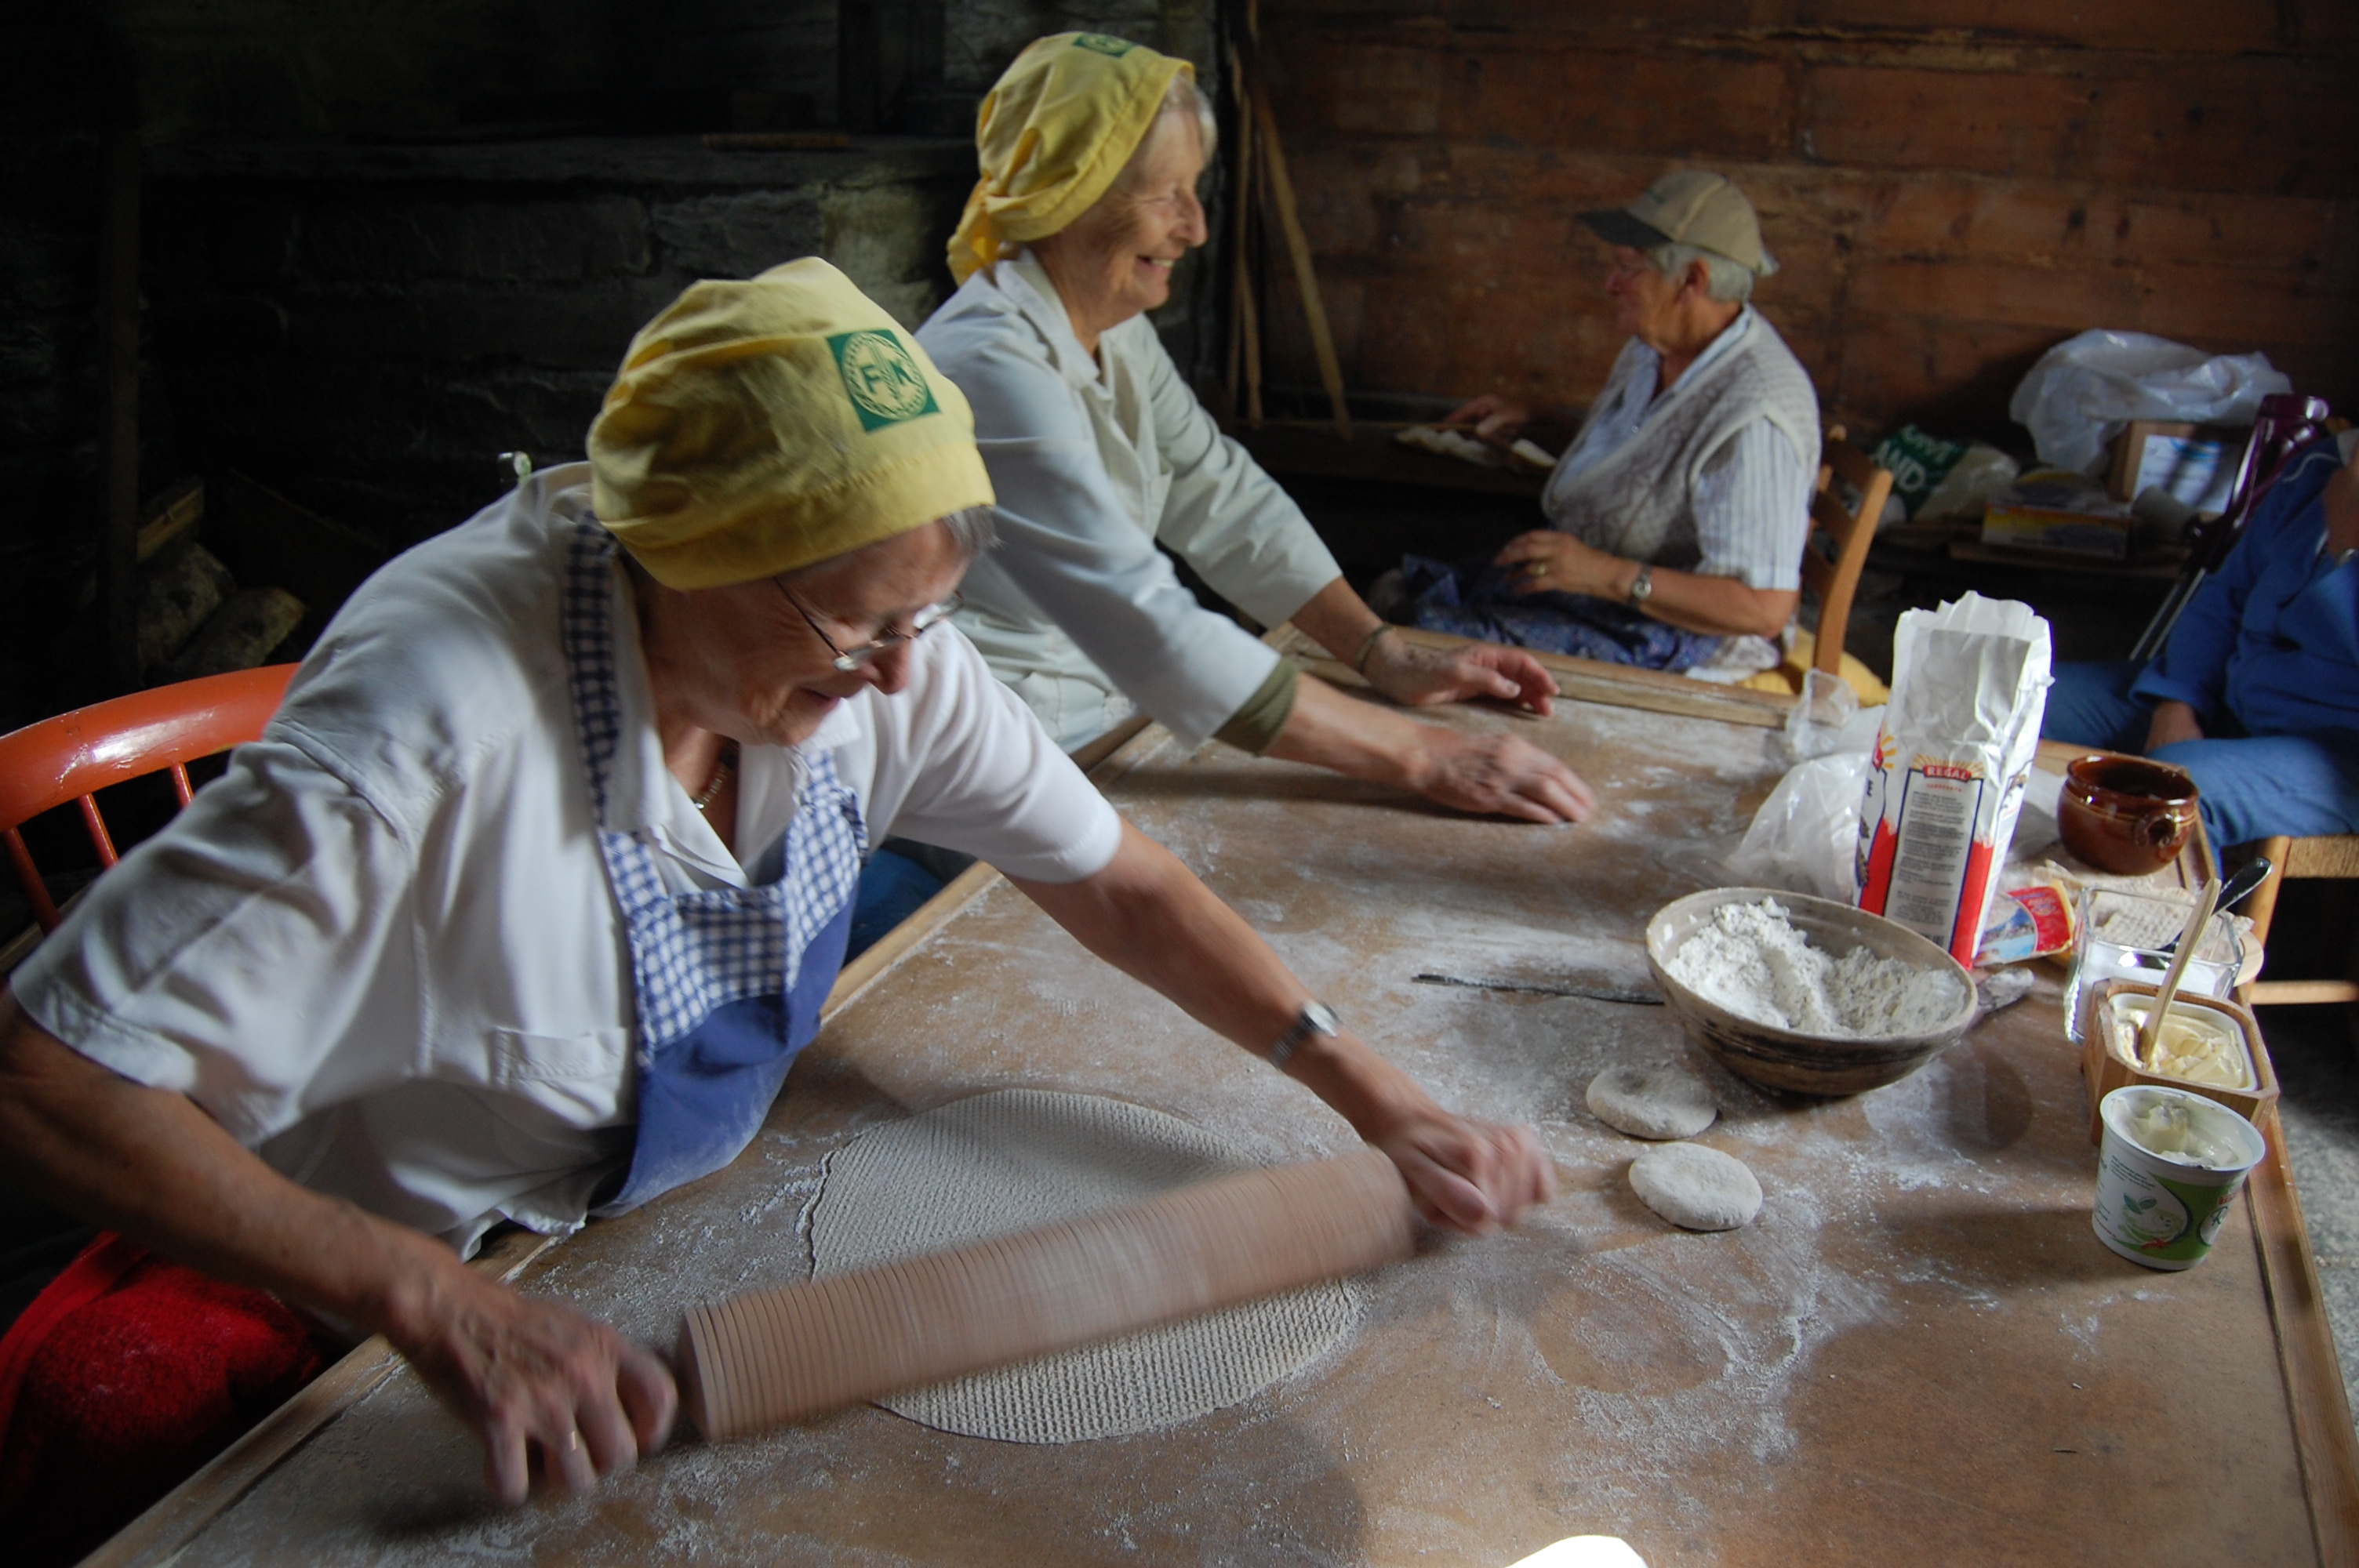 Baking and handicrafts at Agatunet and Folkemuseet